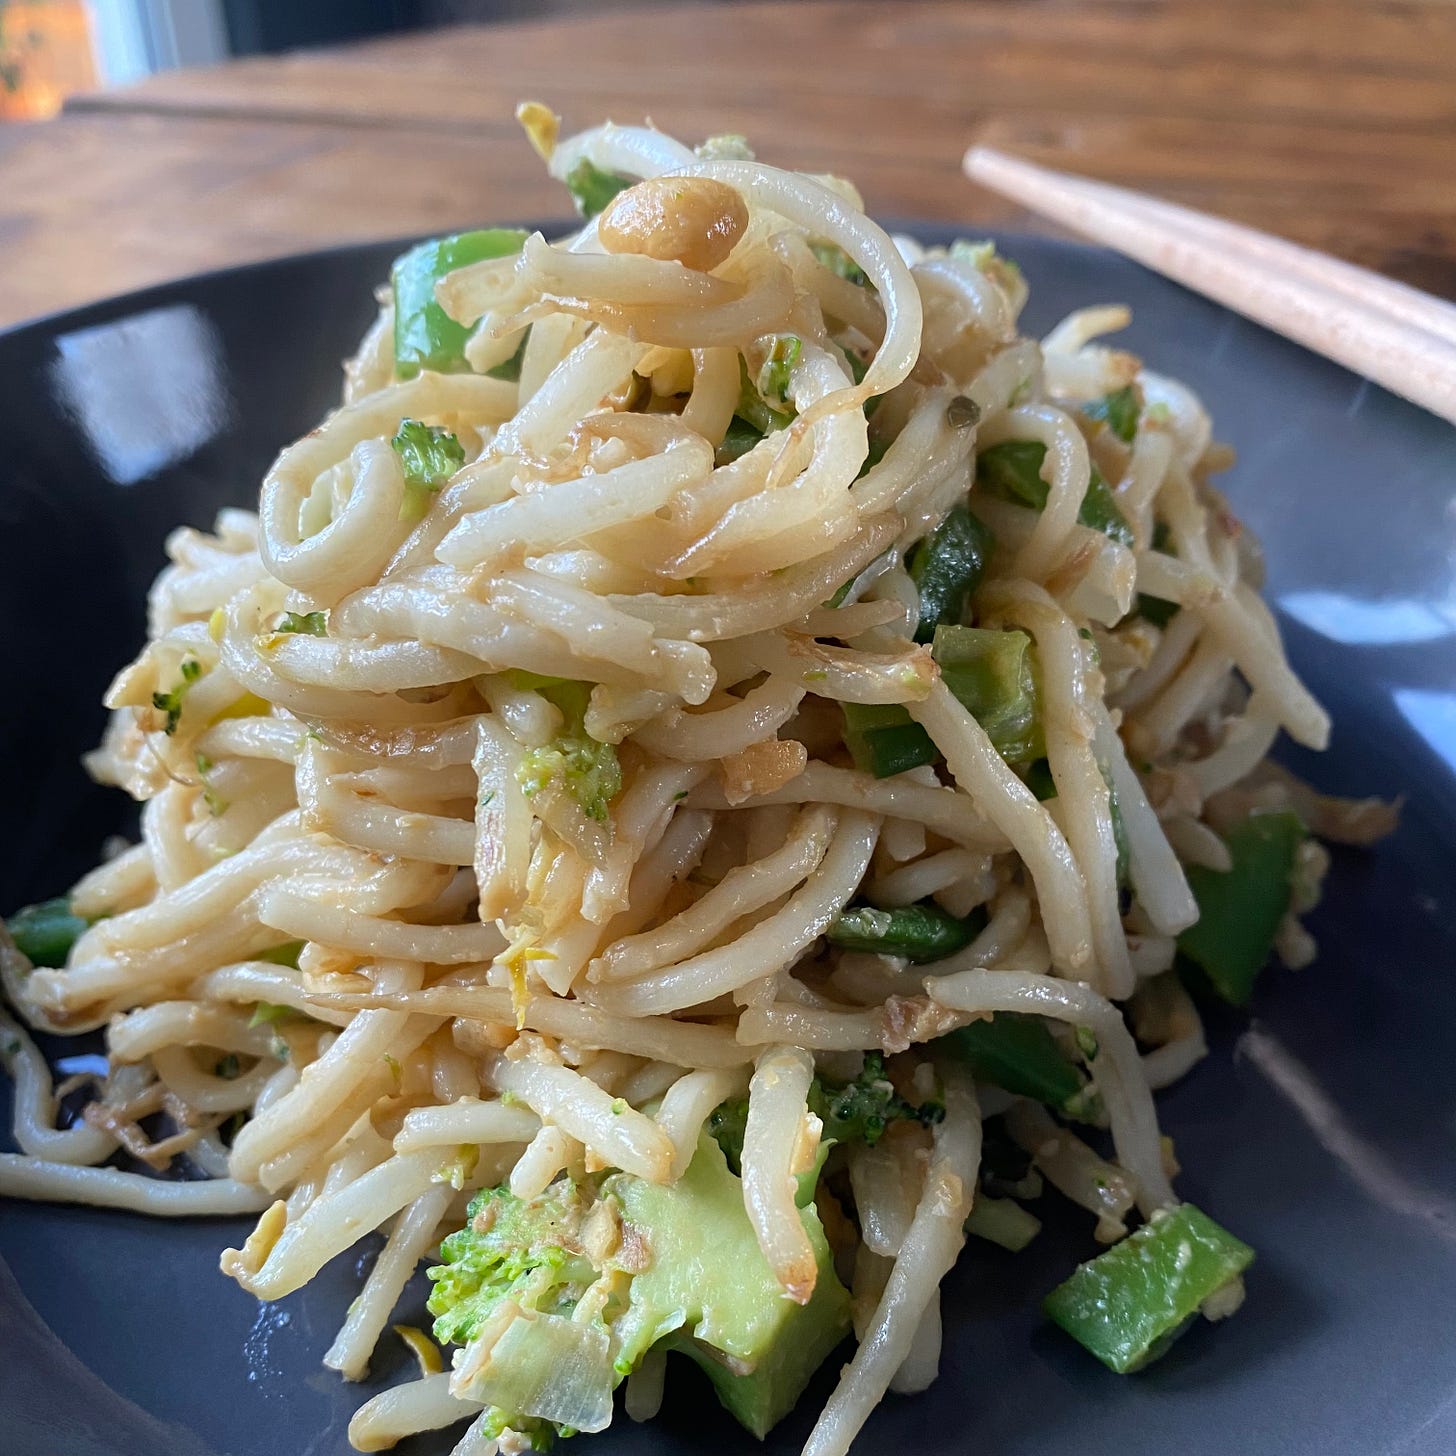 Bowl of noodles with broccoli, sugar snaps, bean sprouts and peanuts